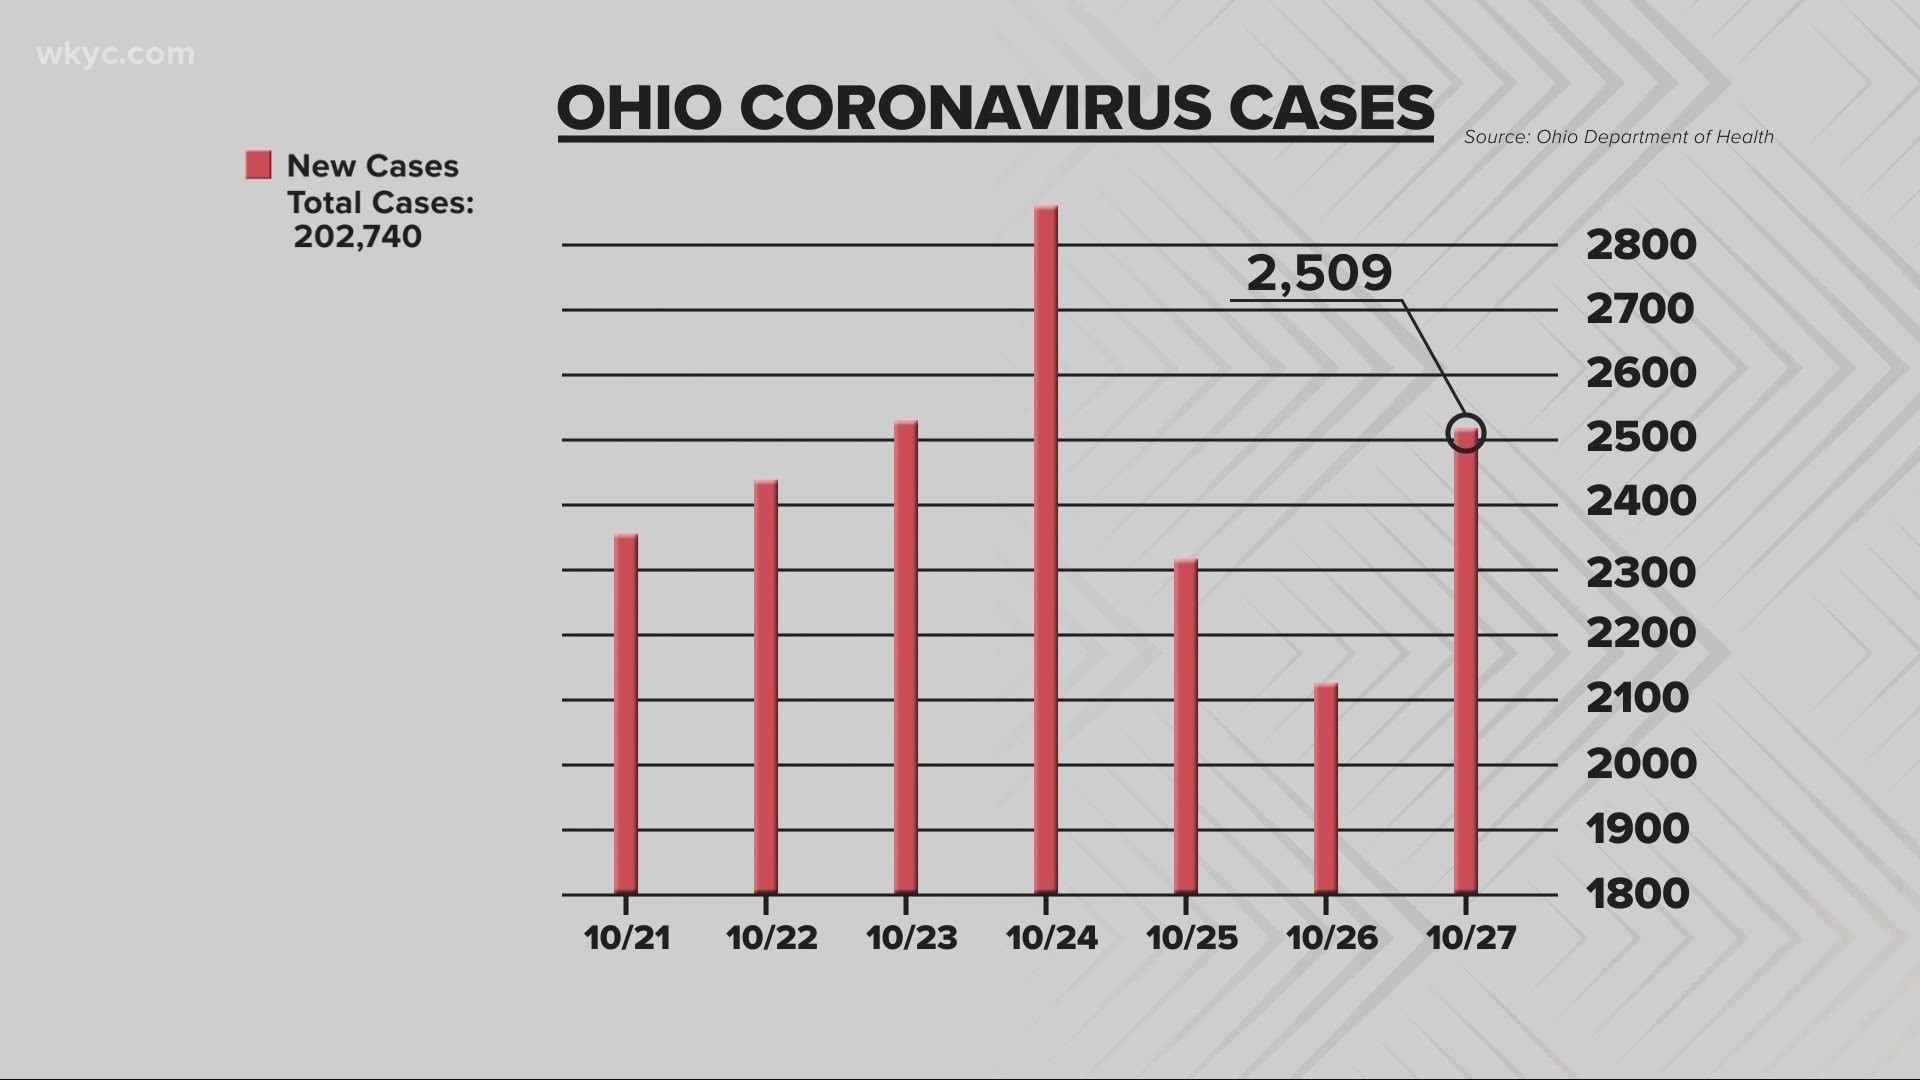 The Ohio Department of Health is reporting 2,509 new cases in the last 24 hours. Ohio also has 1,456 COVID-19 patients in the hospital.